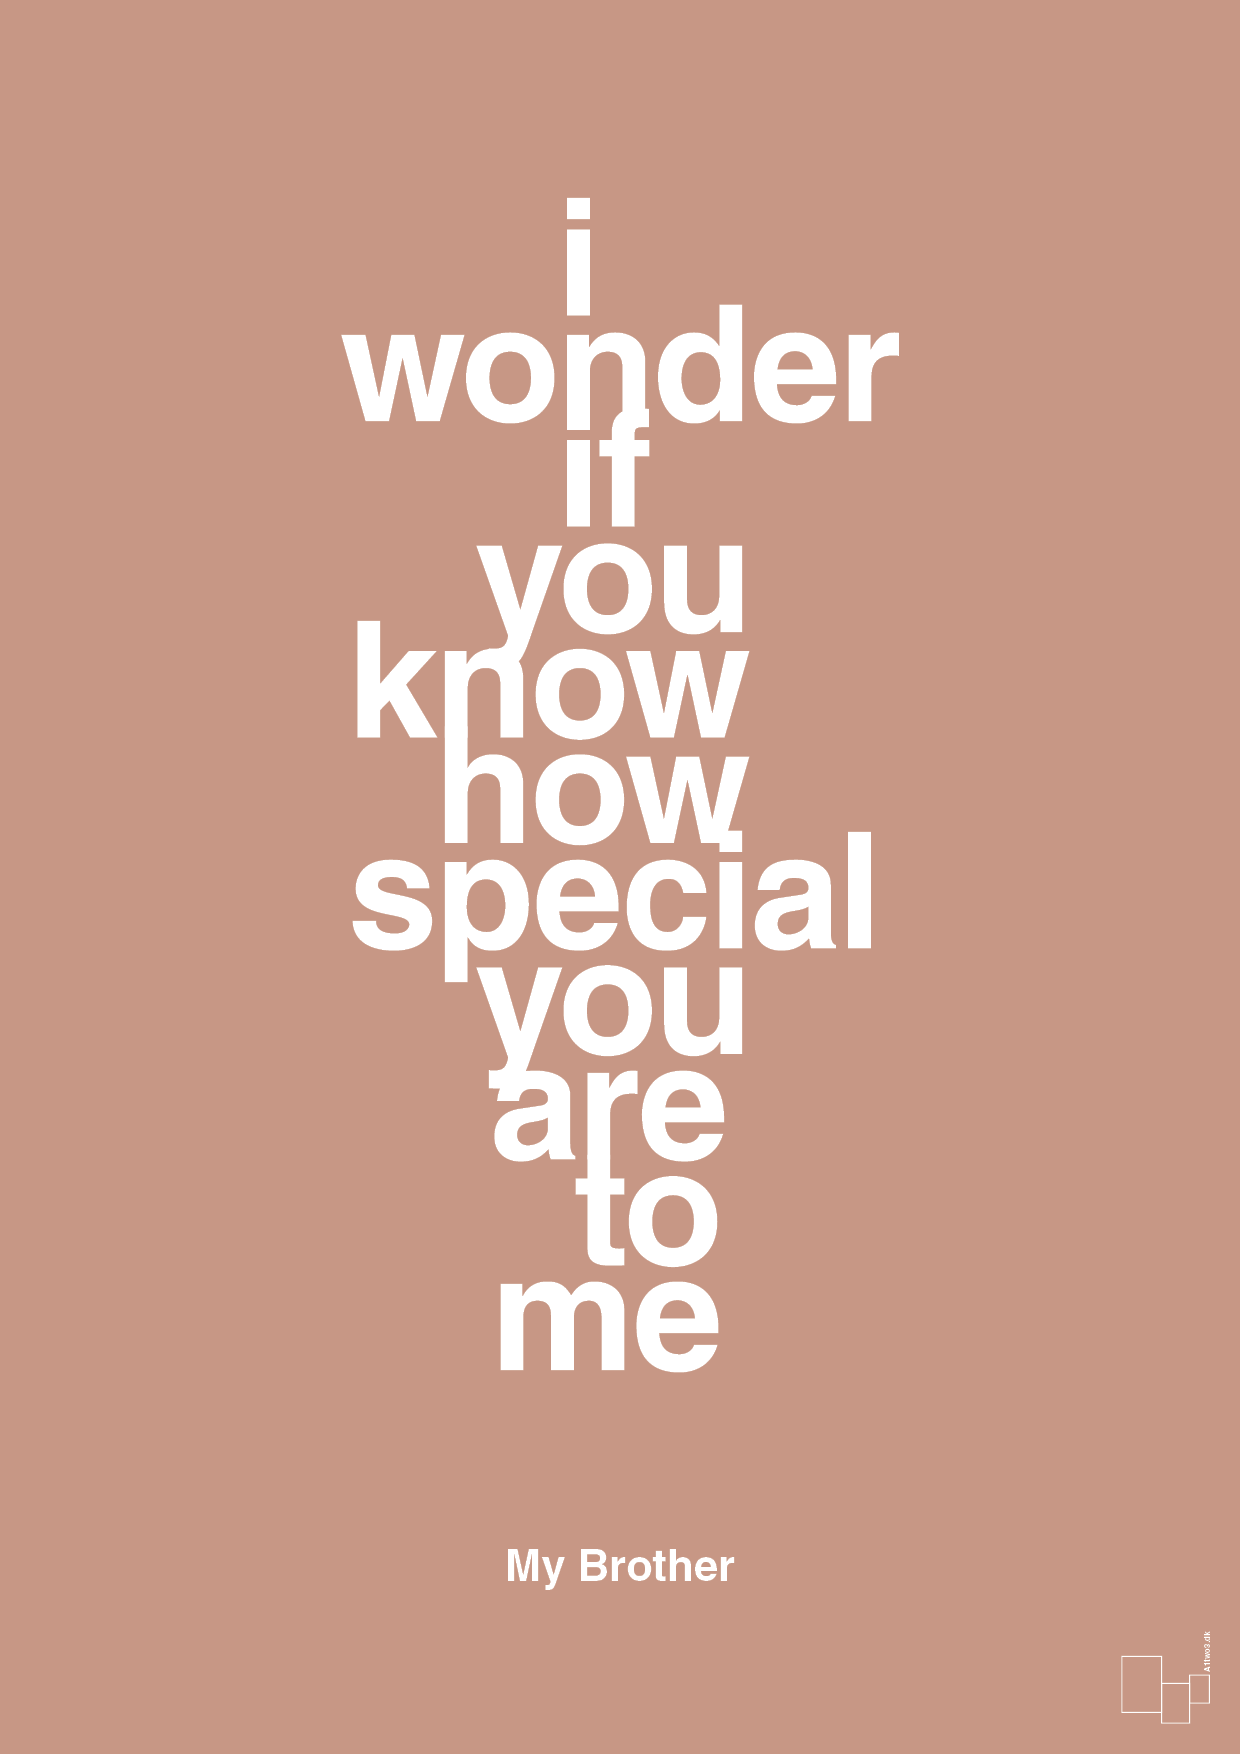 my brother - i wonder if you know how special you are to me - Plakat med Citater i Powder